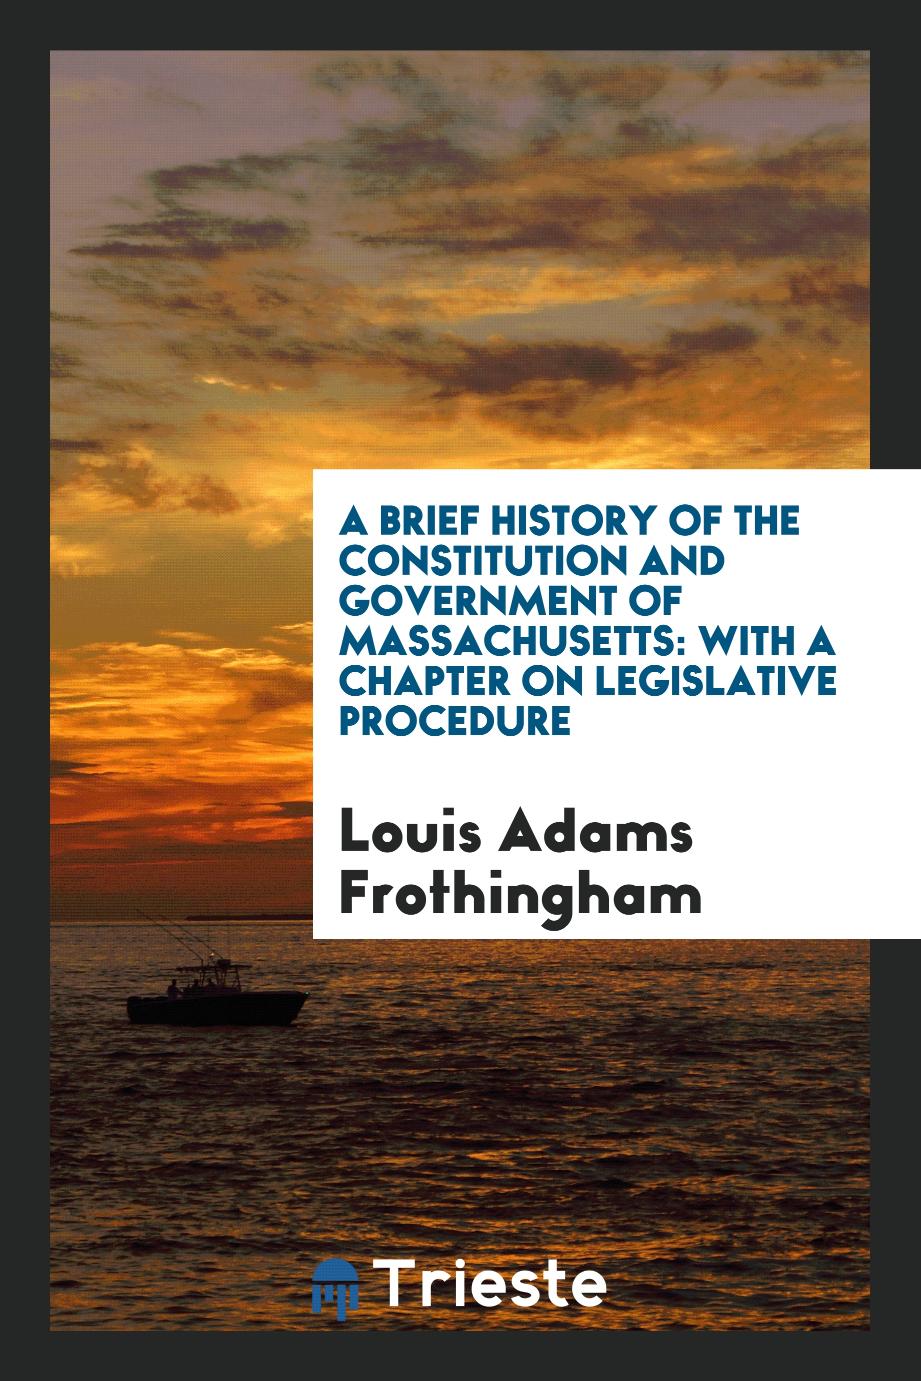 A Brief History of the Constitution and Government of Massachusetts: With a Chapter on Legislative Procedure